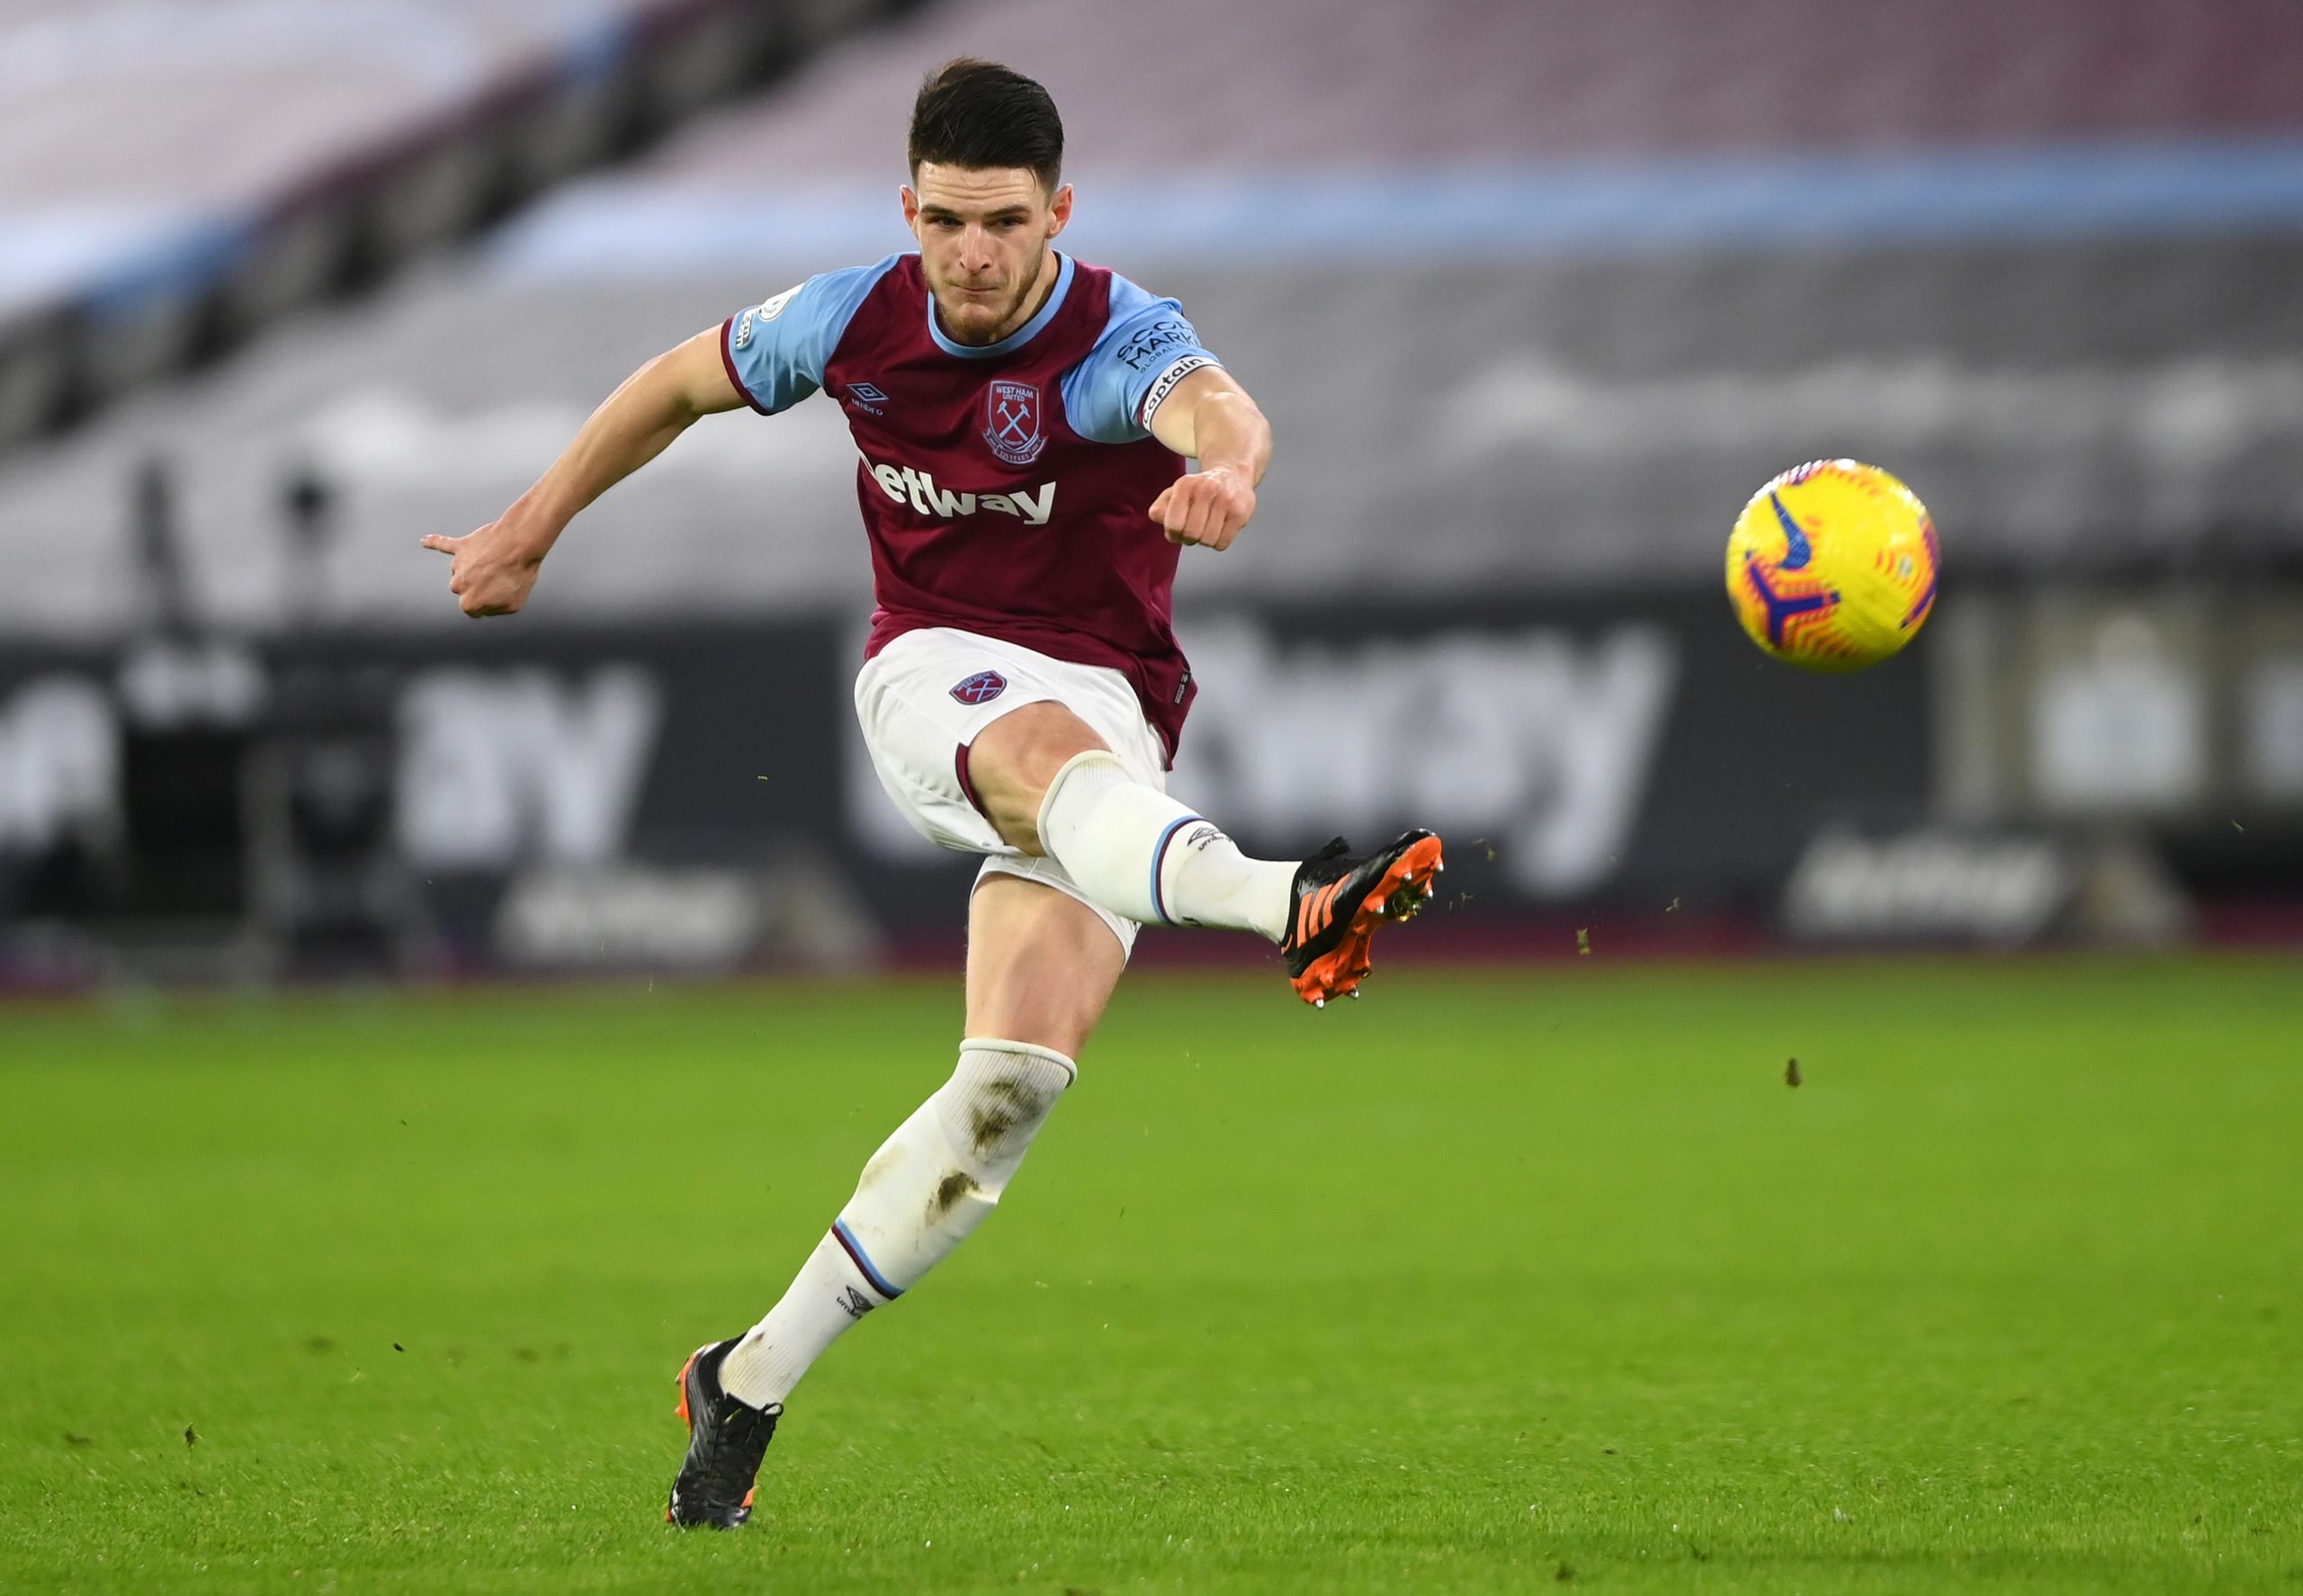 Transfer News: Declan Rice is set to stay at West Ham despite Chelsea interest.